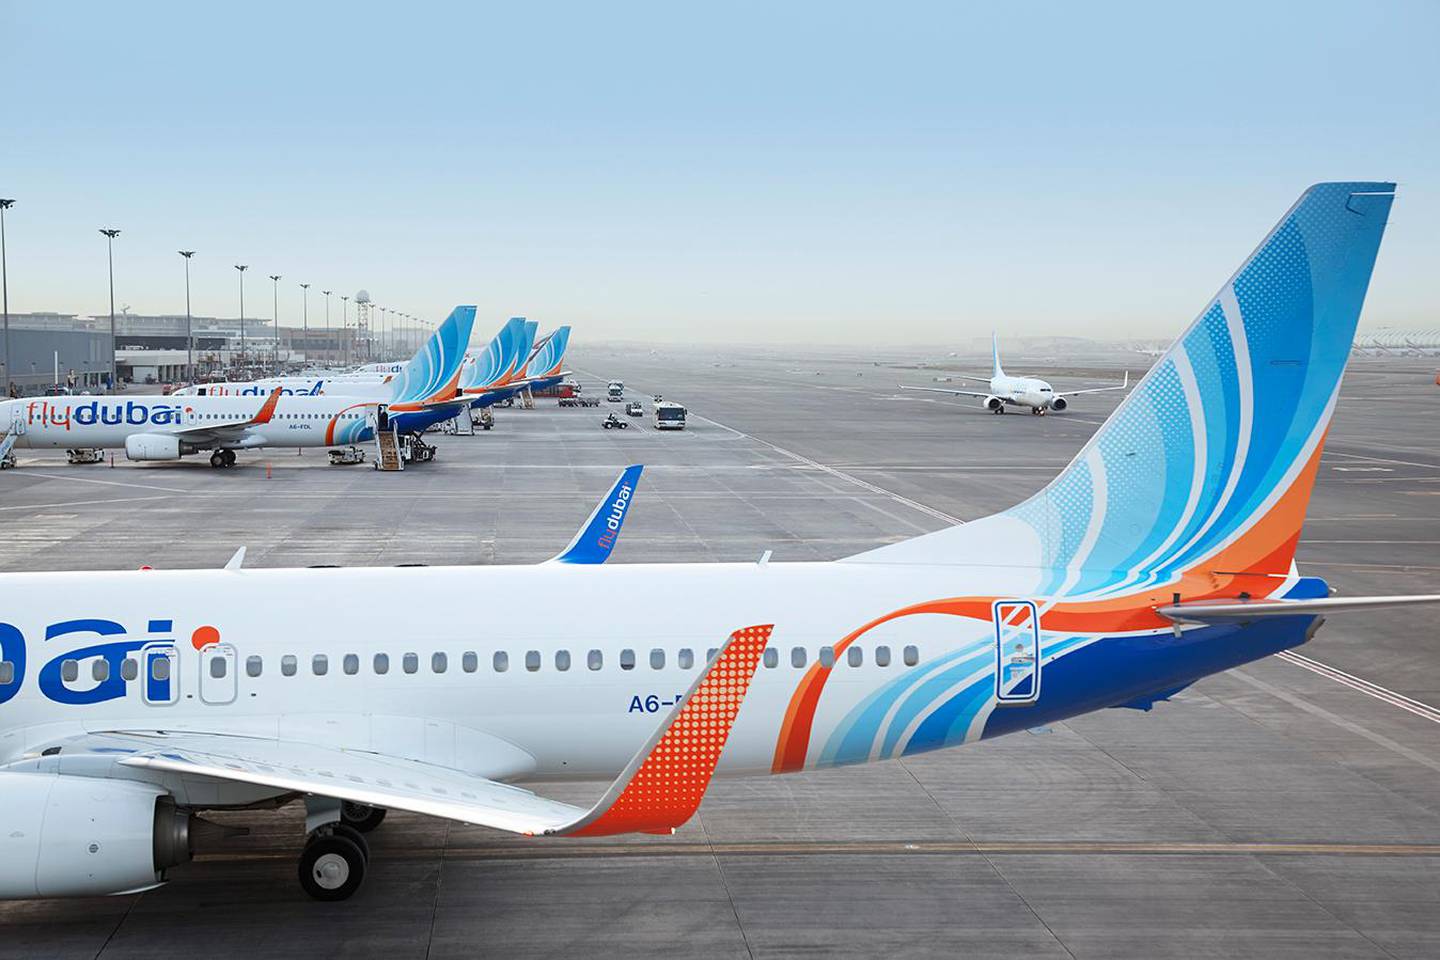 Flydubai is the first airline to partner with Al Hosn.